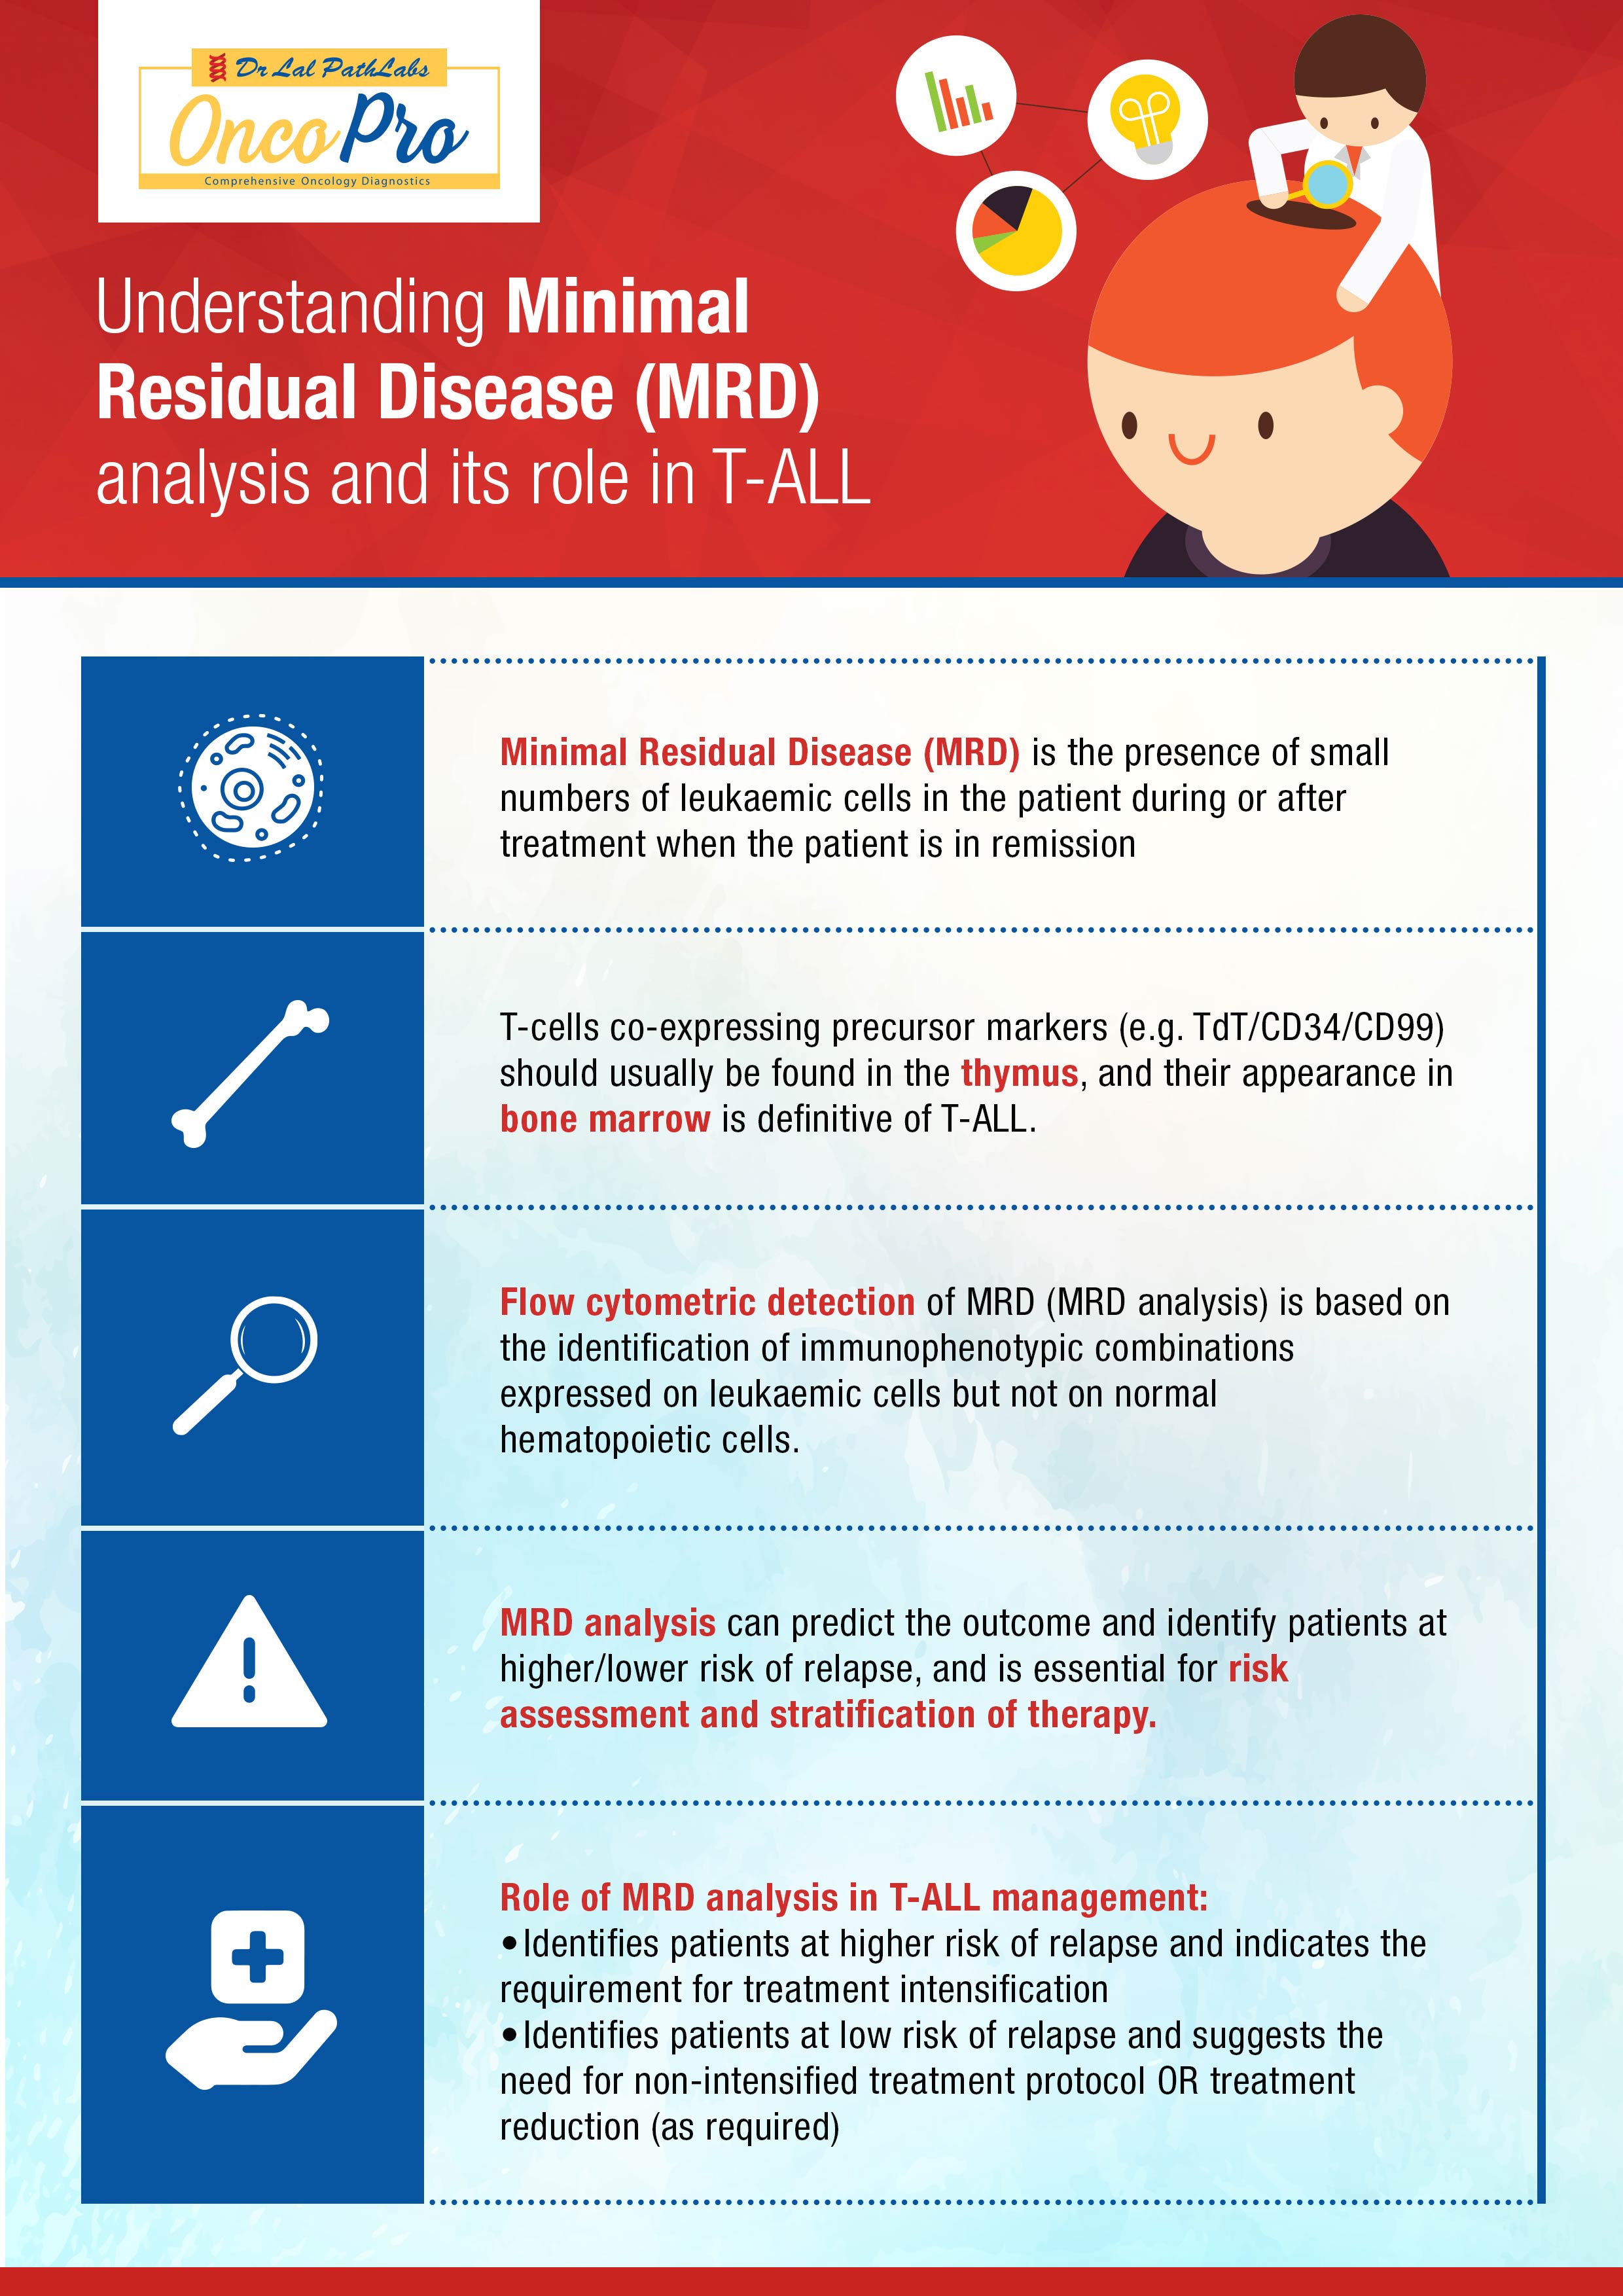 Understanding Minimal Residual Disease (MRD) Analysis and its Role in T-ALL